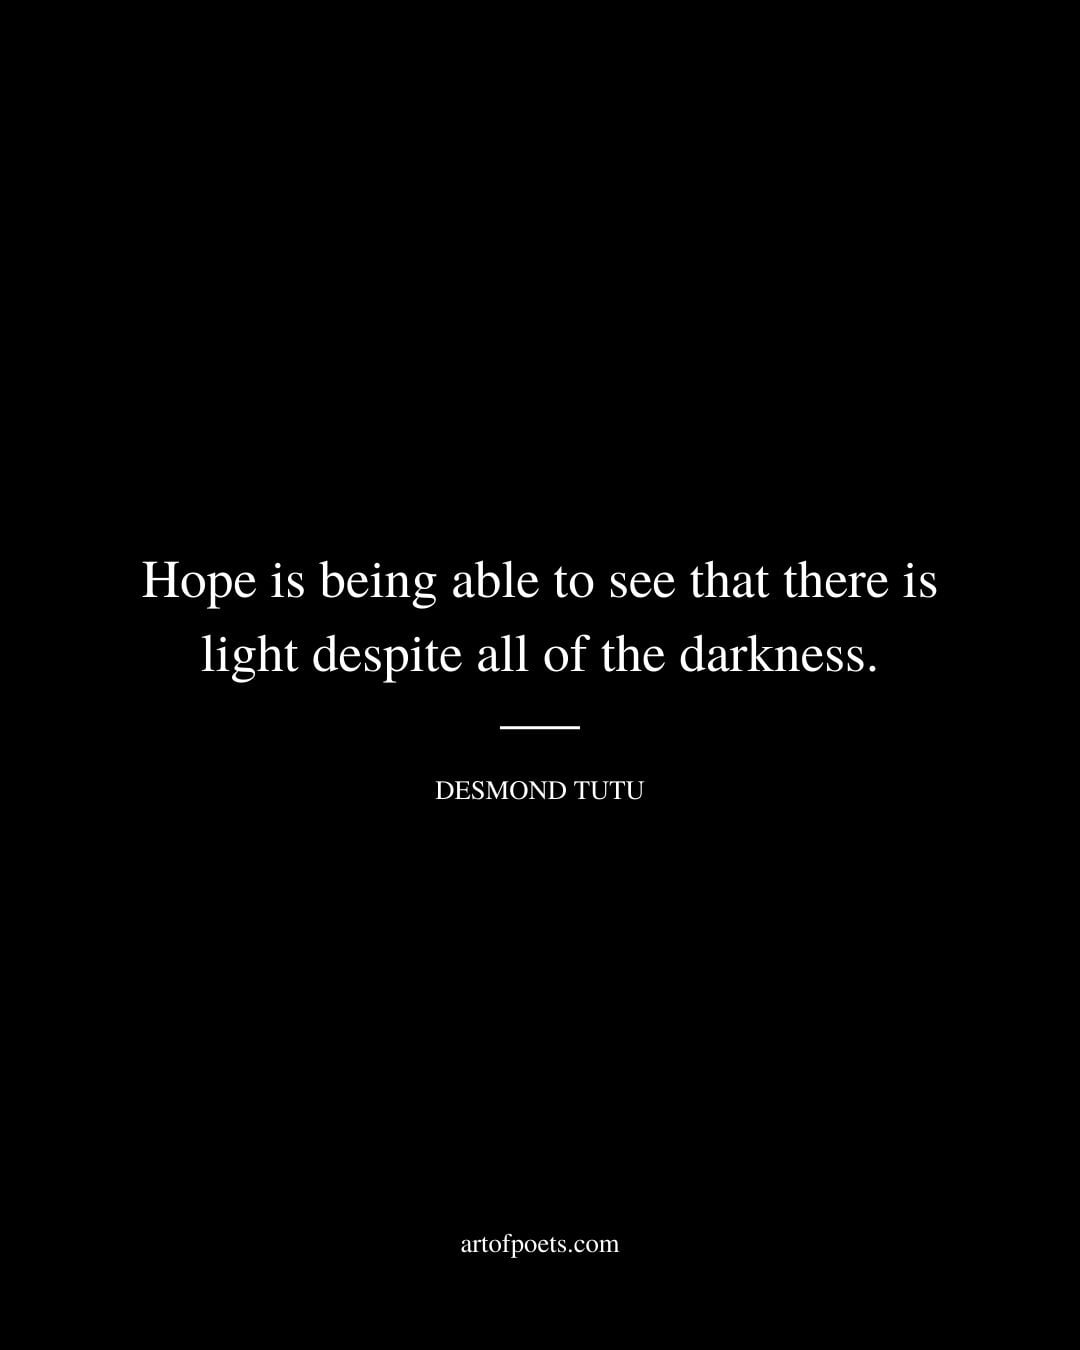 Hope is being able to see that there is light despite all of the darkness. Desmond Tutu